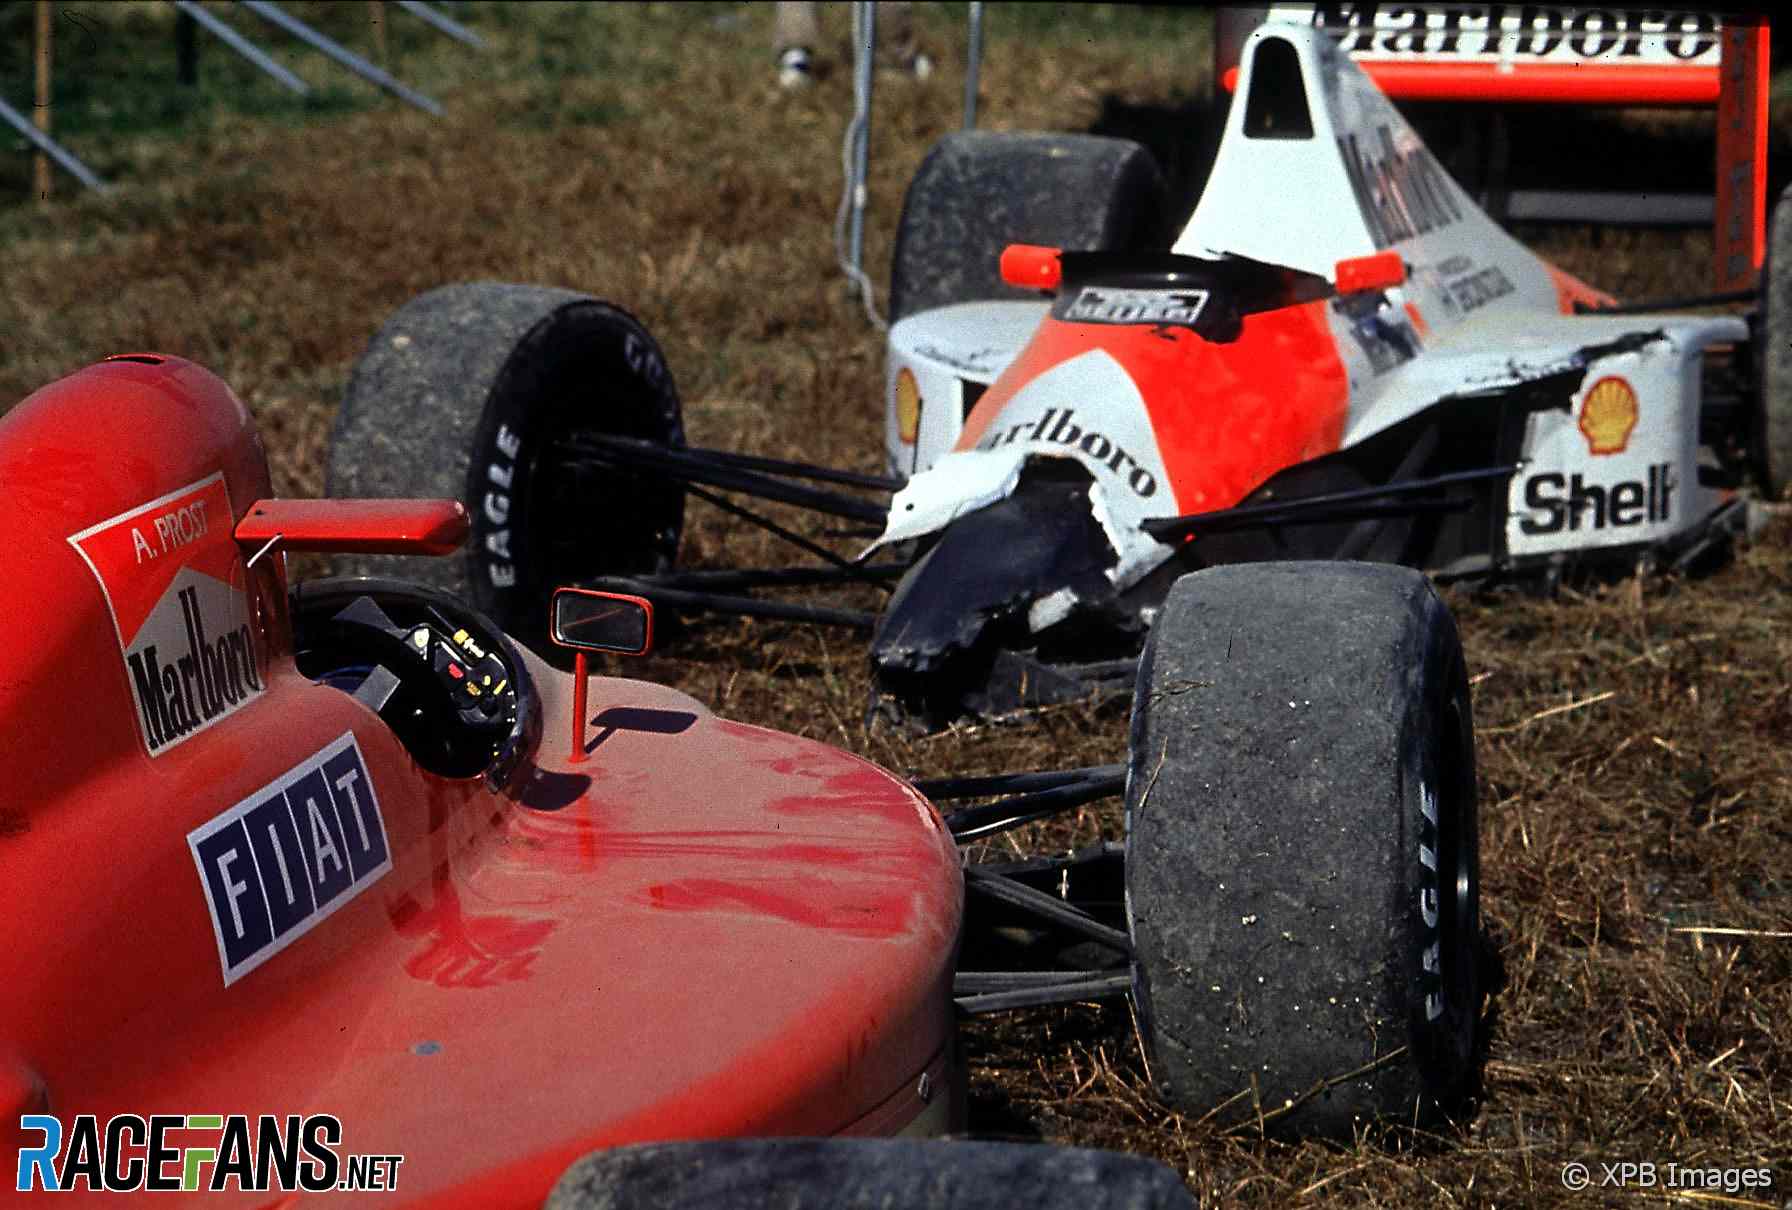 Ayrton Senna and Alain Prost crashed at the start of the 1990 Japanese Grand Prix